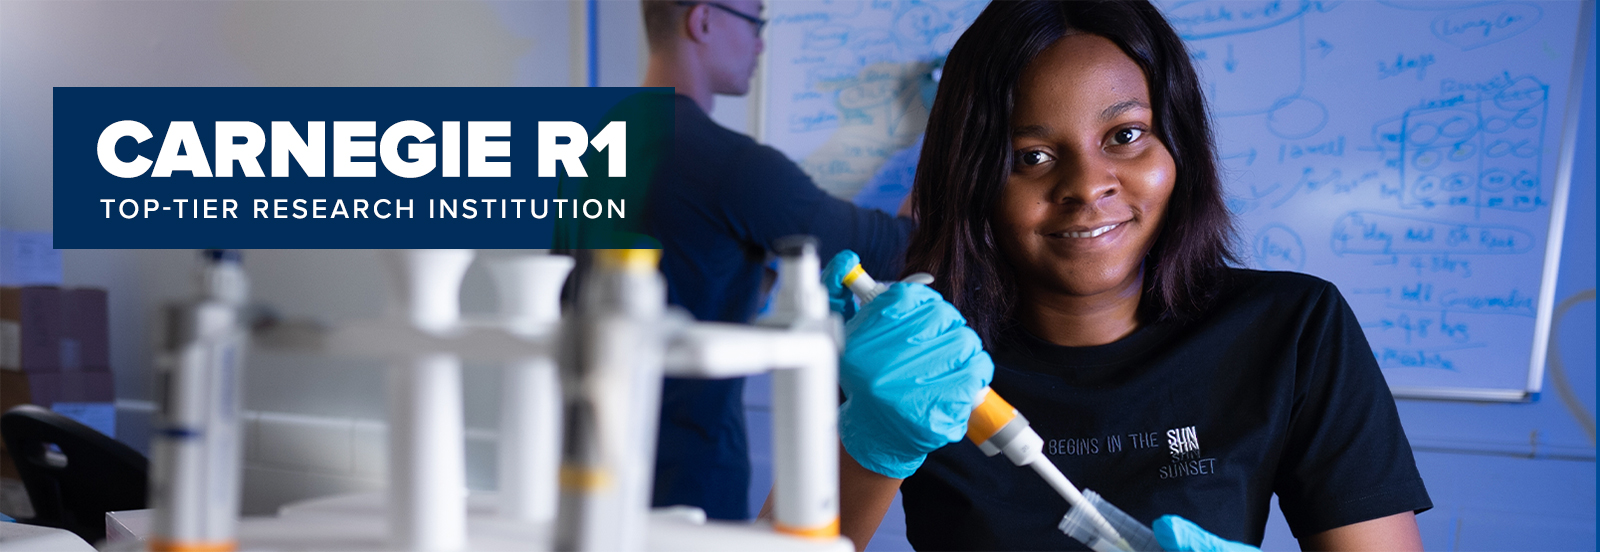 Carnegie R1 | Top-Tier Research Institution